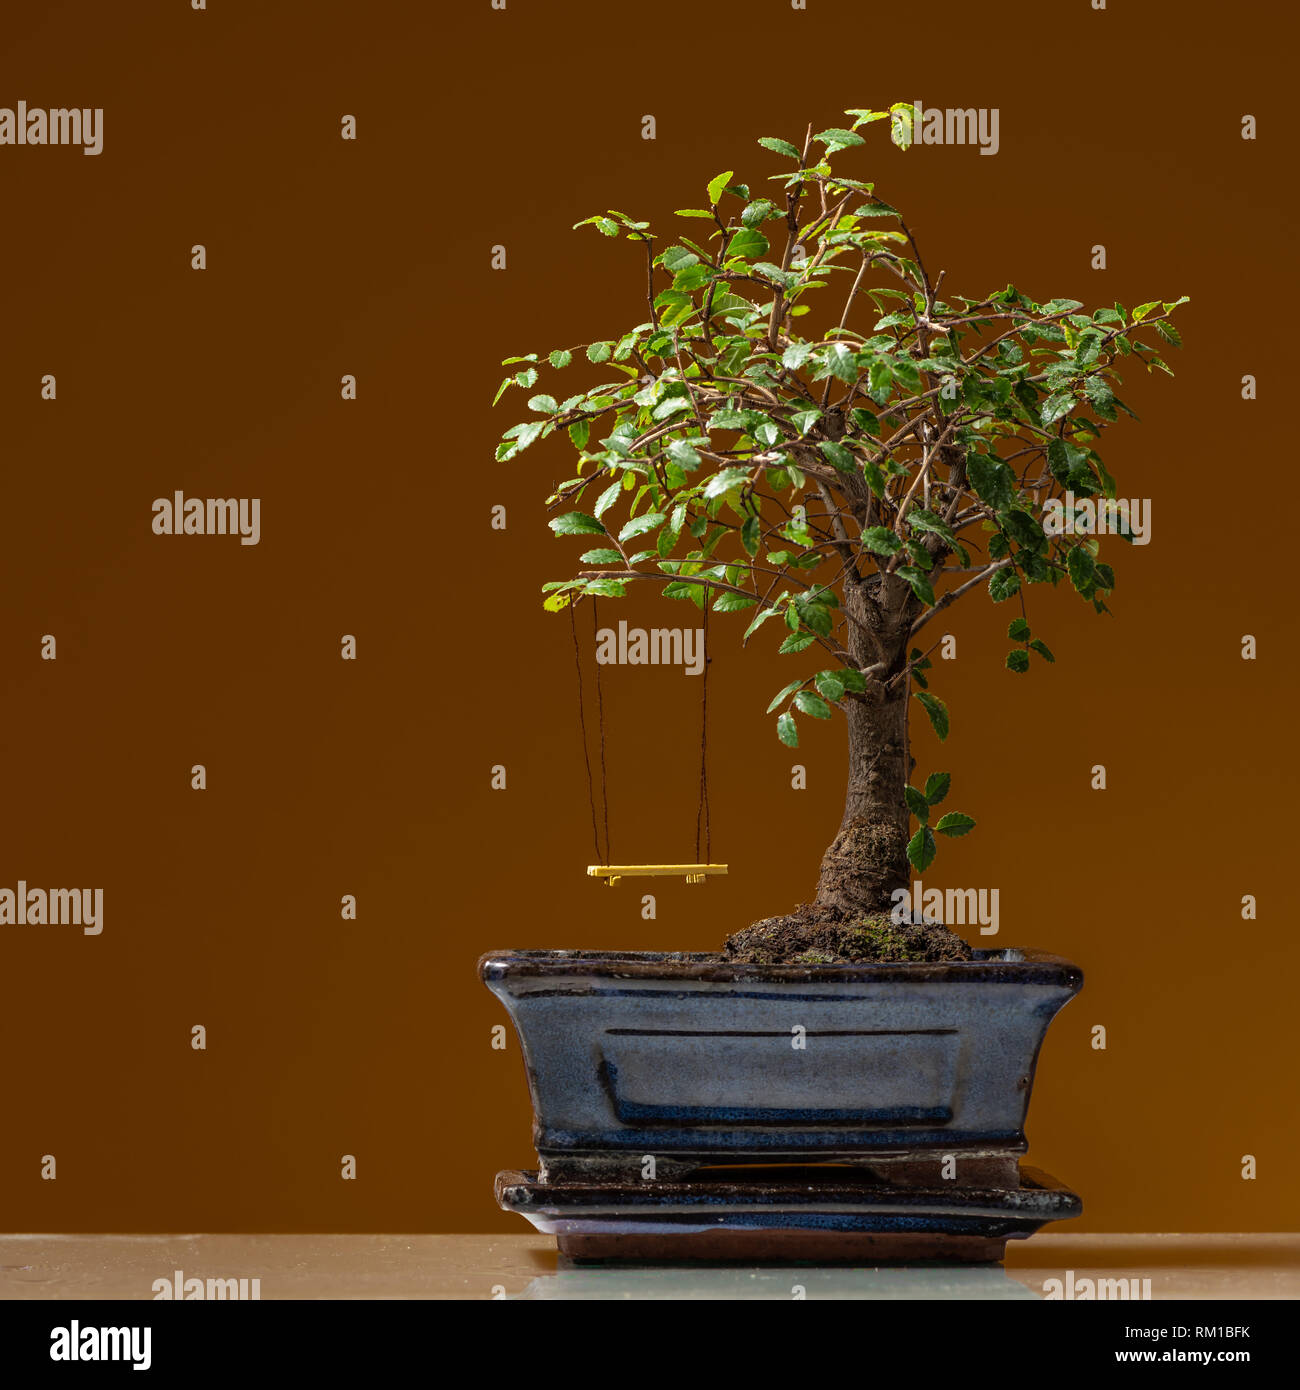 A small bonsai tree planted in a black pot with yellow swing, brown background Stock Photo